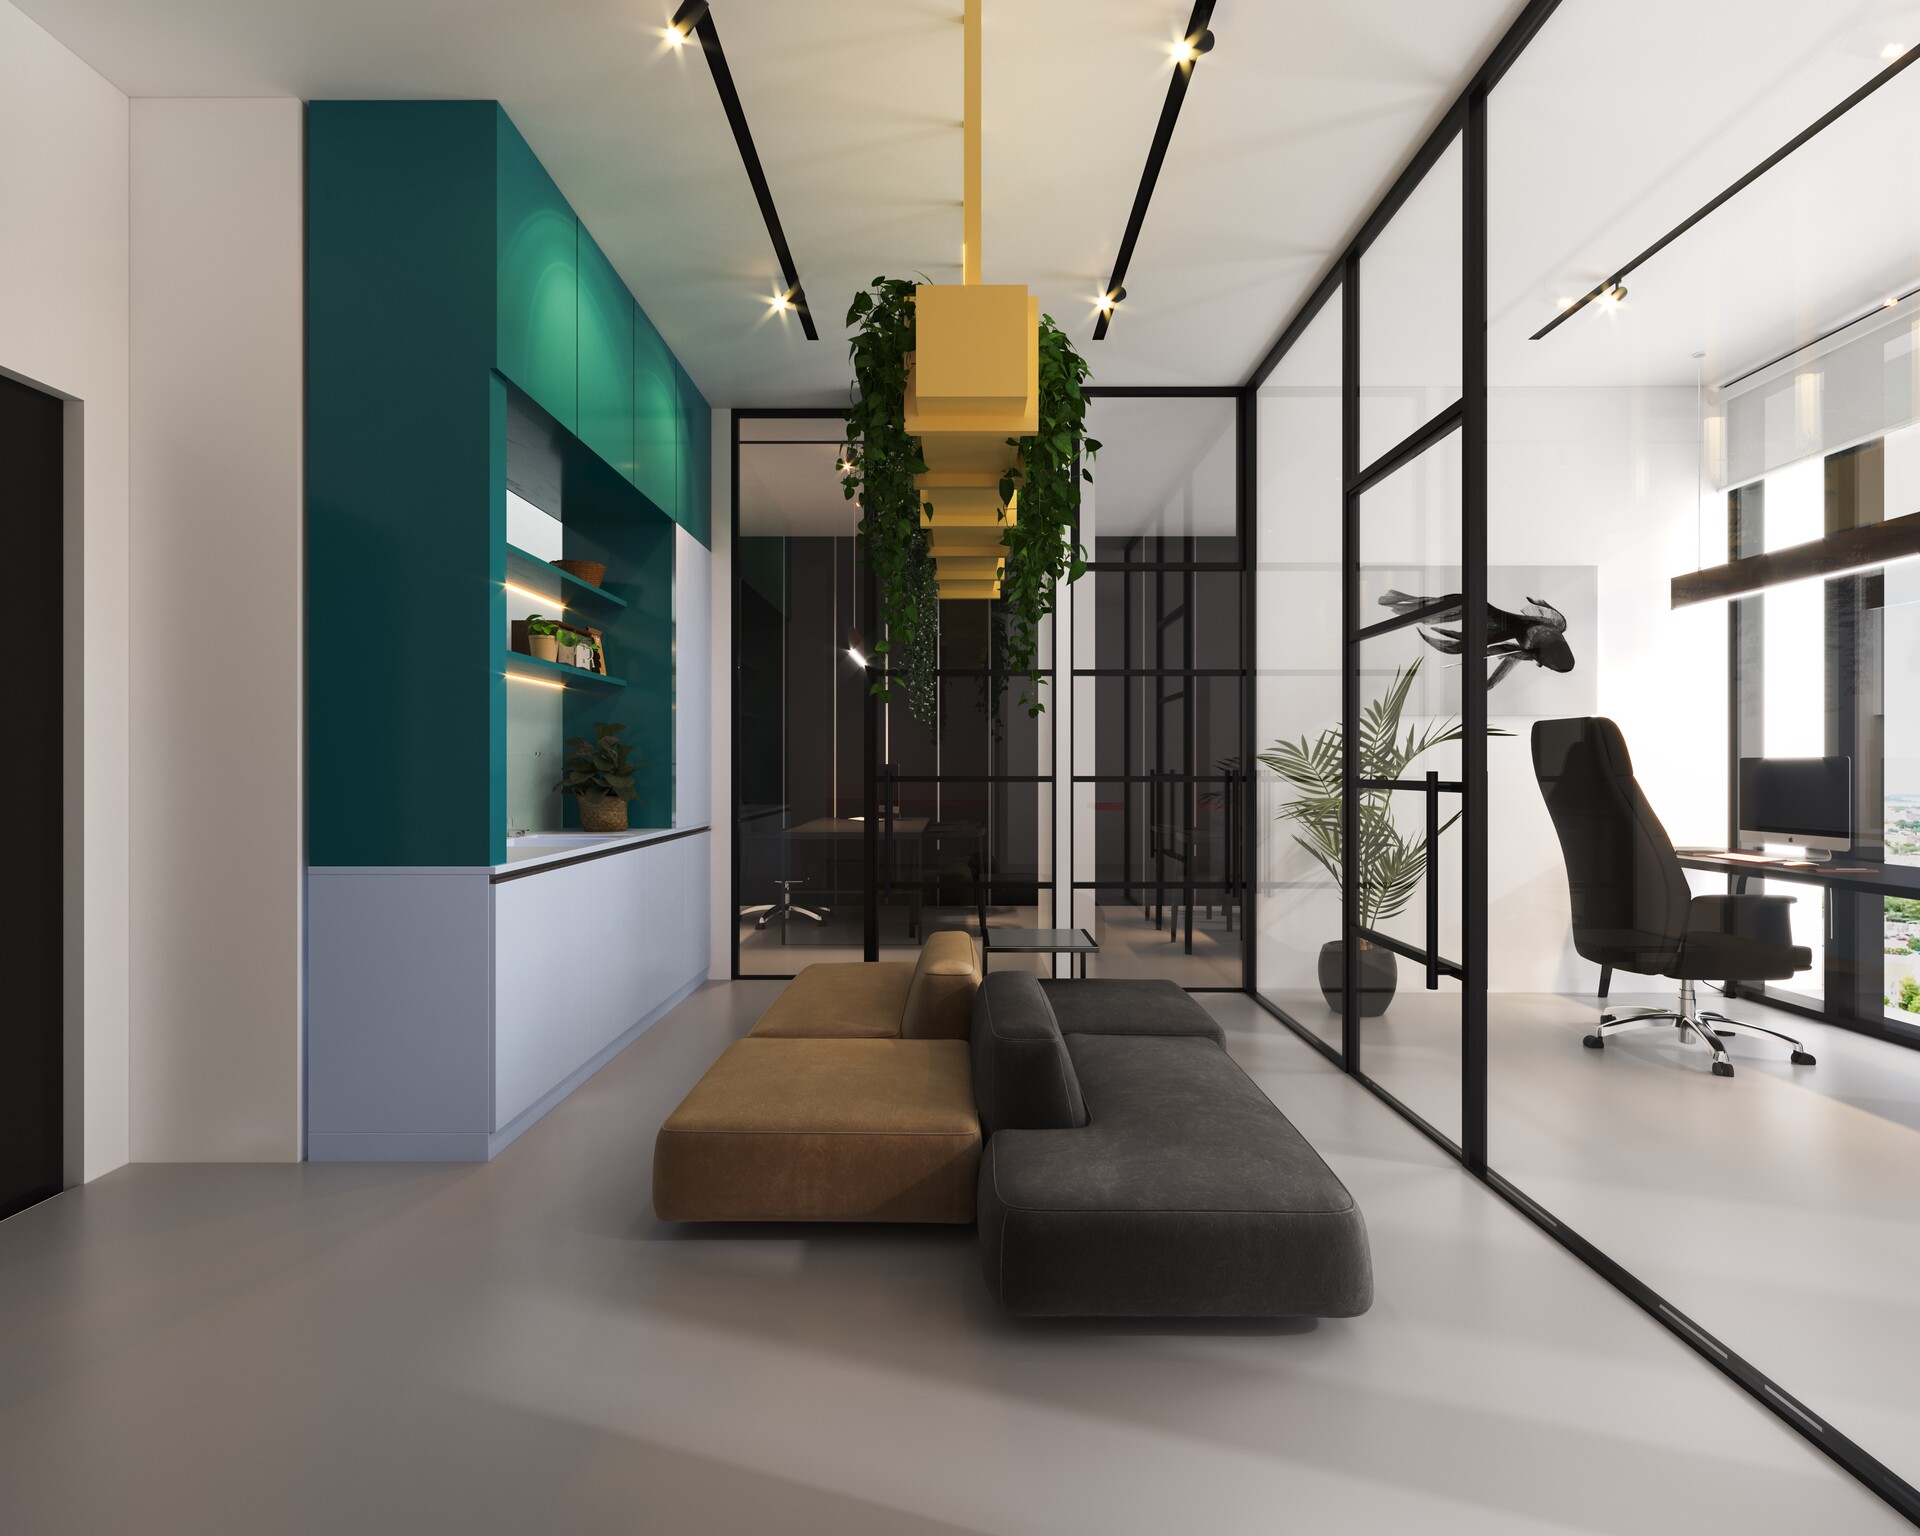 DEER Design - Space Small Office and CoWorking Space |Modern and Minimalist